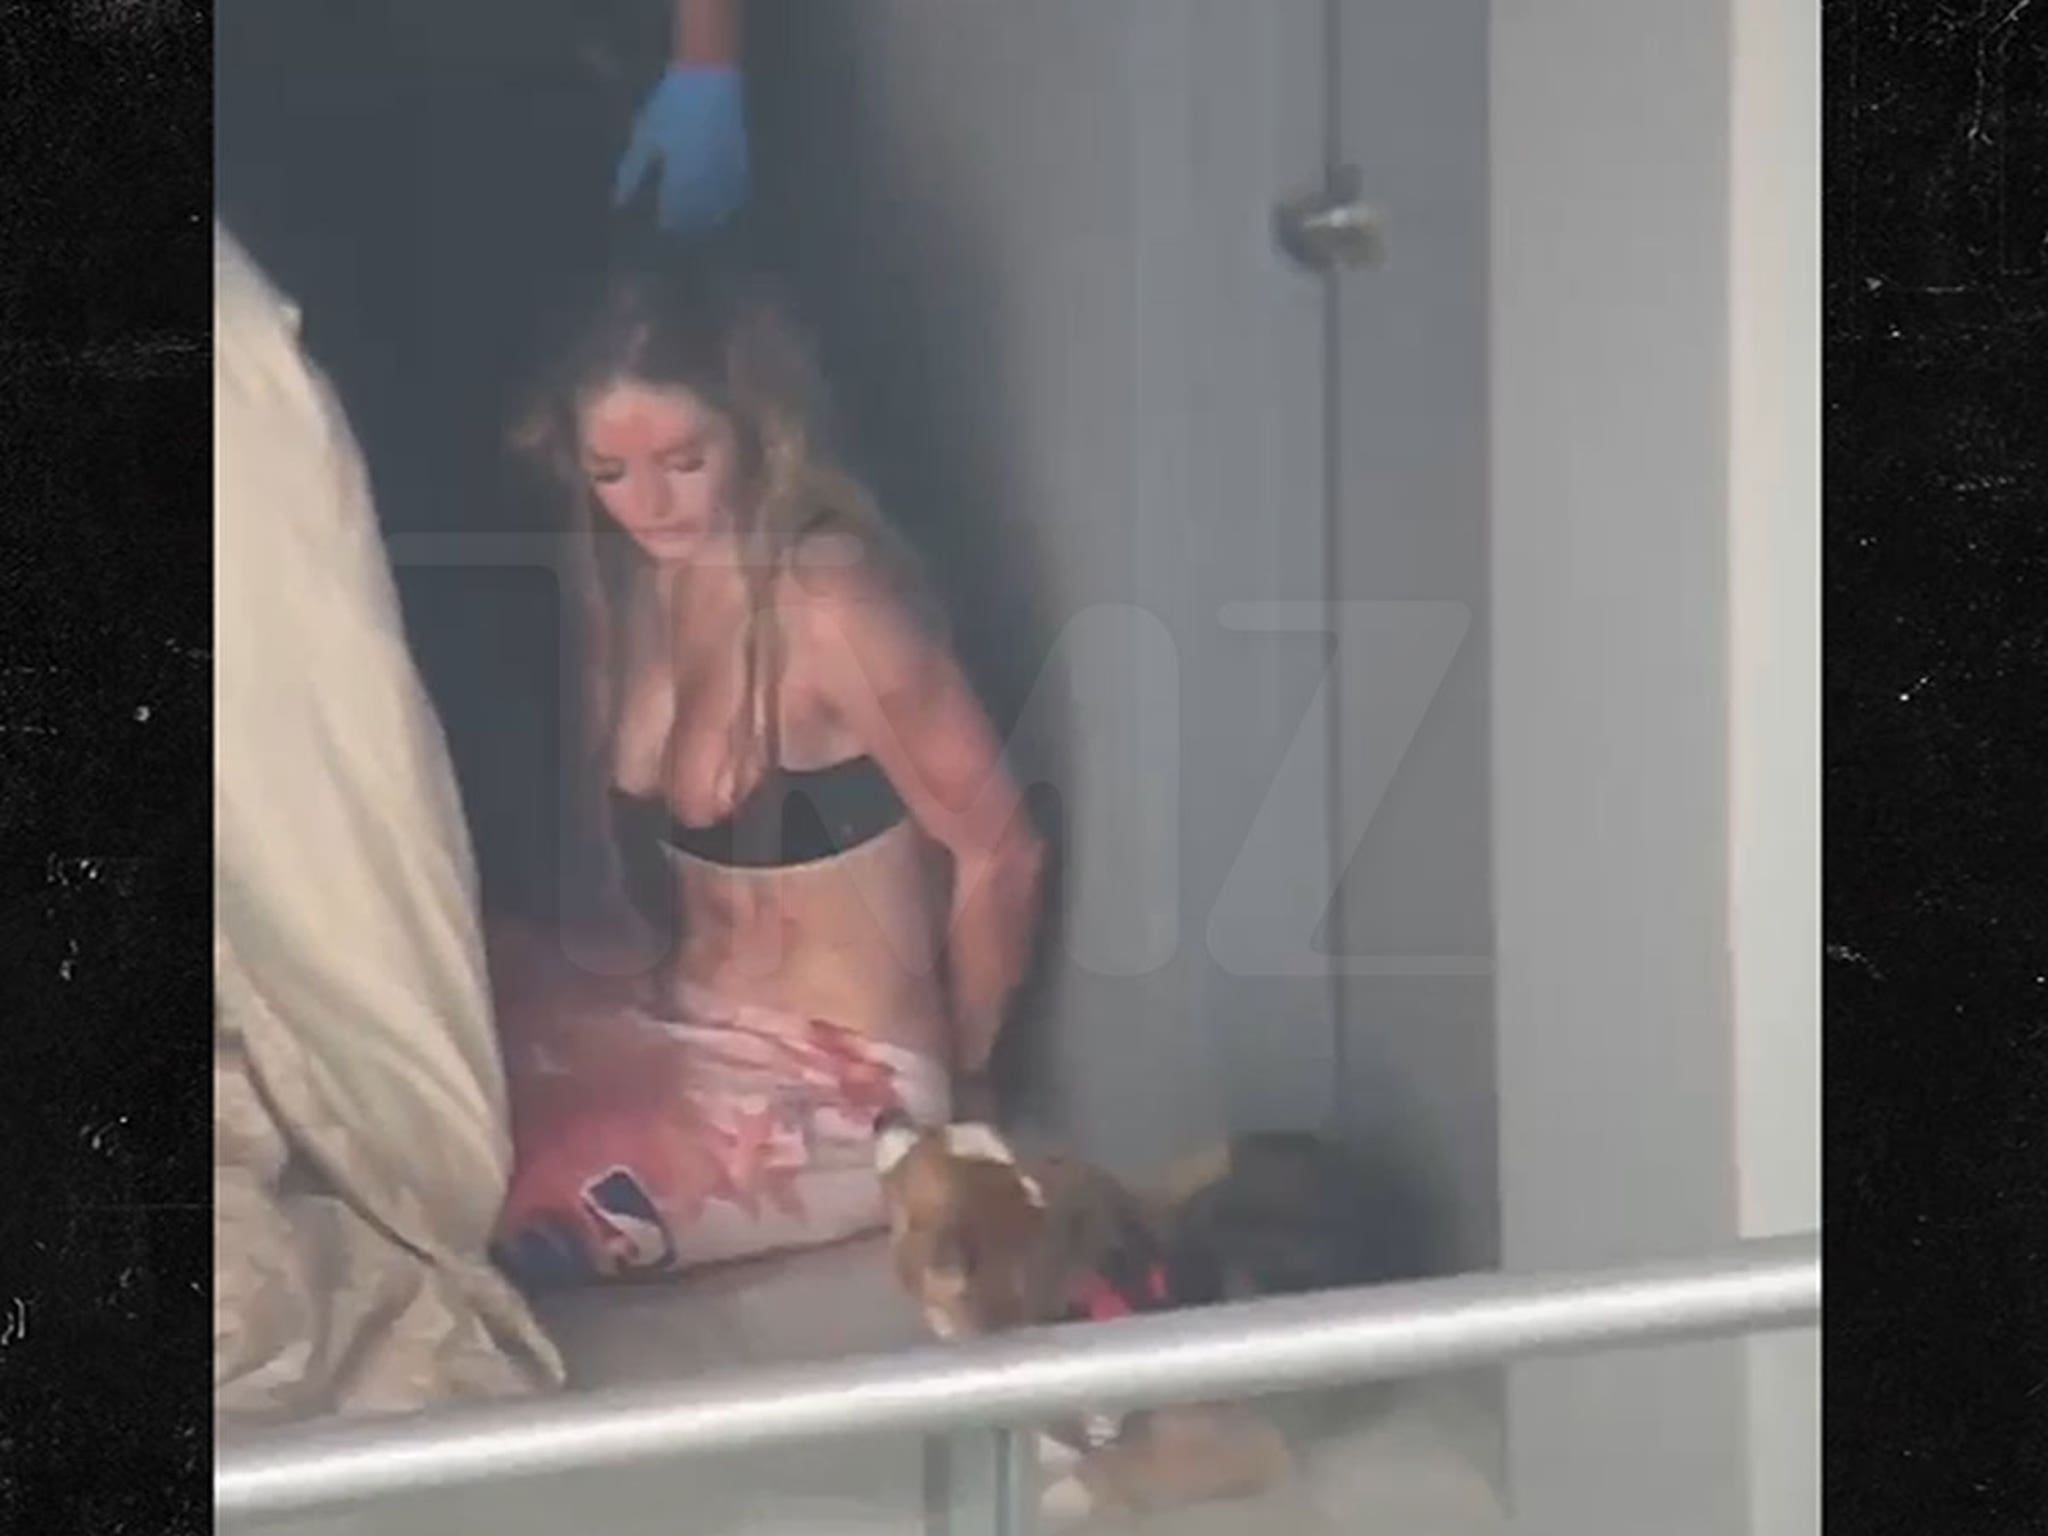 Video From Fatal Miami Stabbing Shows IG Model Covered In Blood image pic image